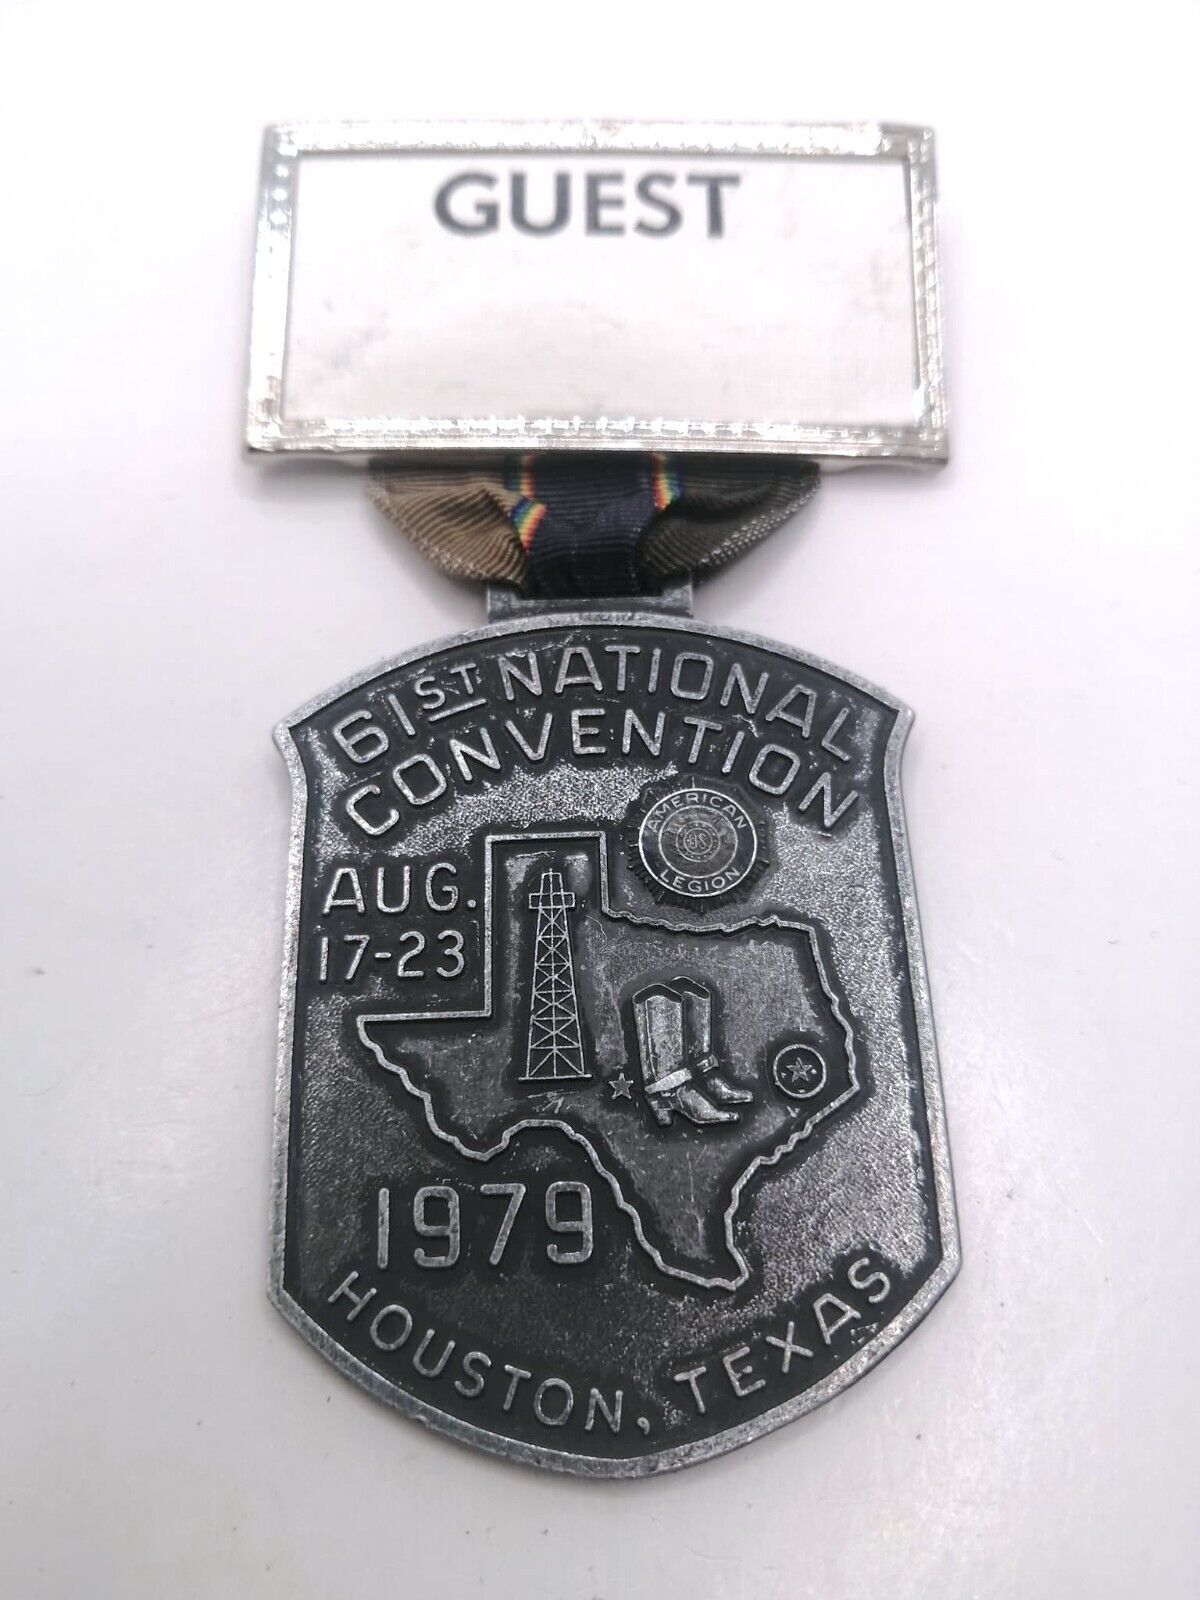 American Legion 61st National Convention Medal 1979 Houston Texas Vintage Guest